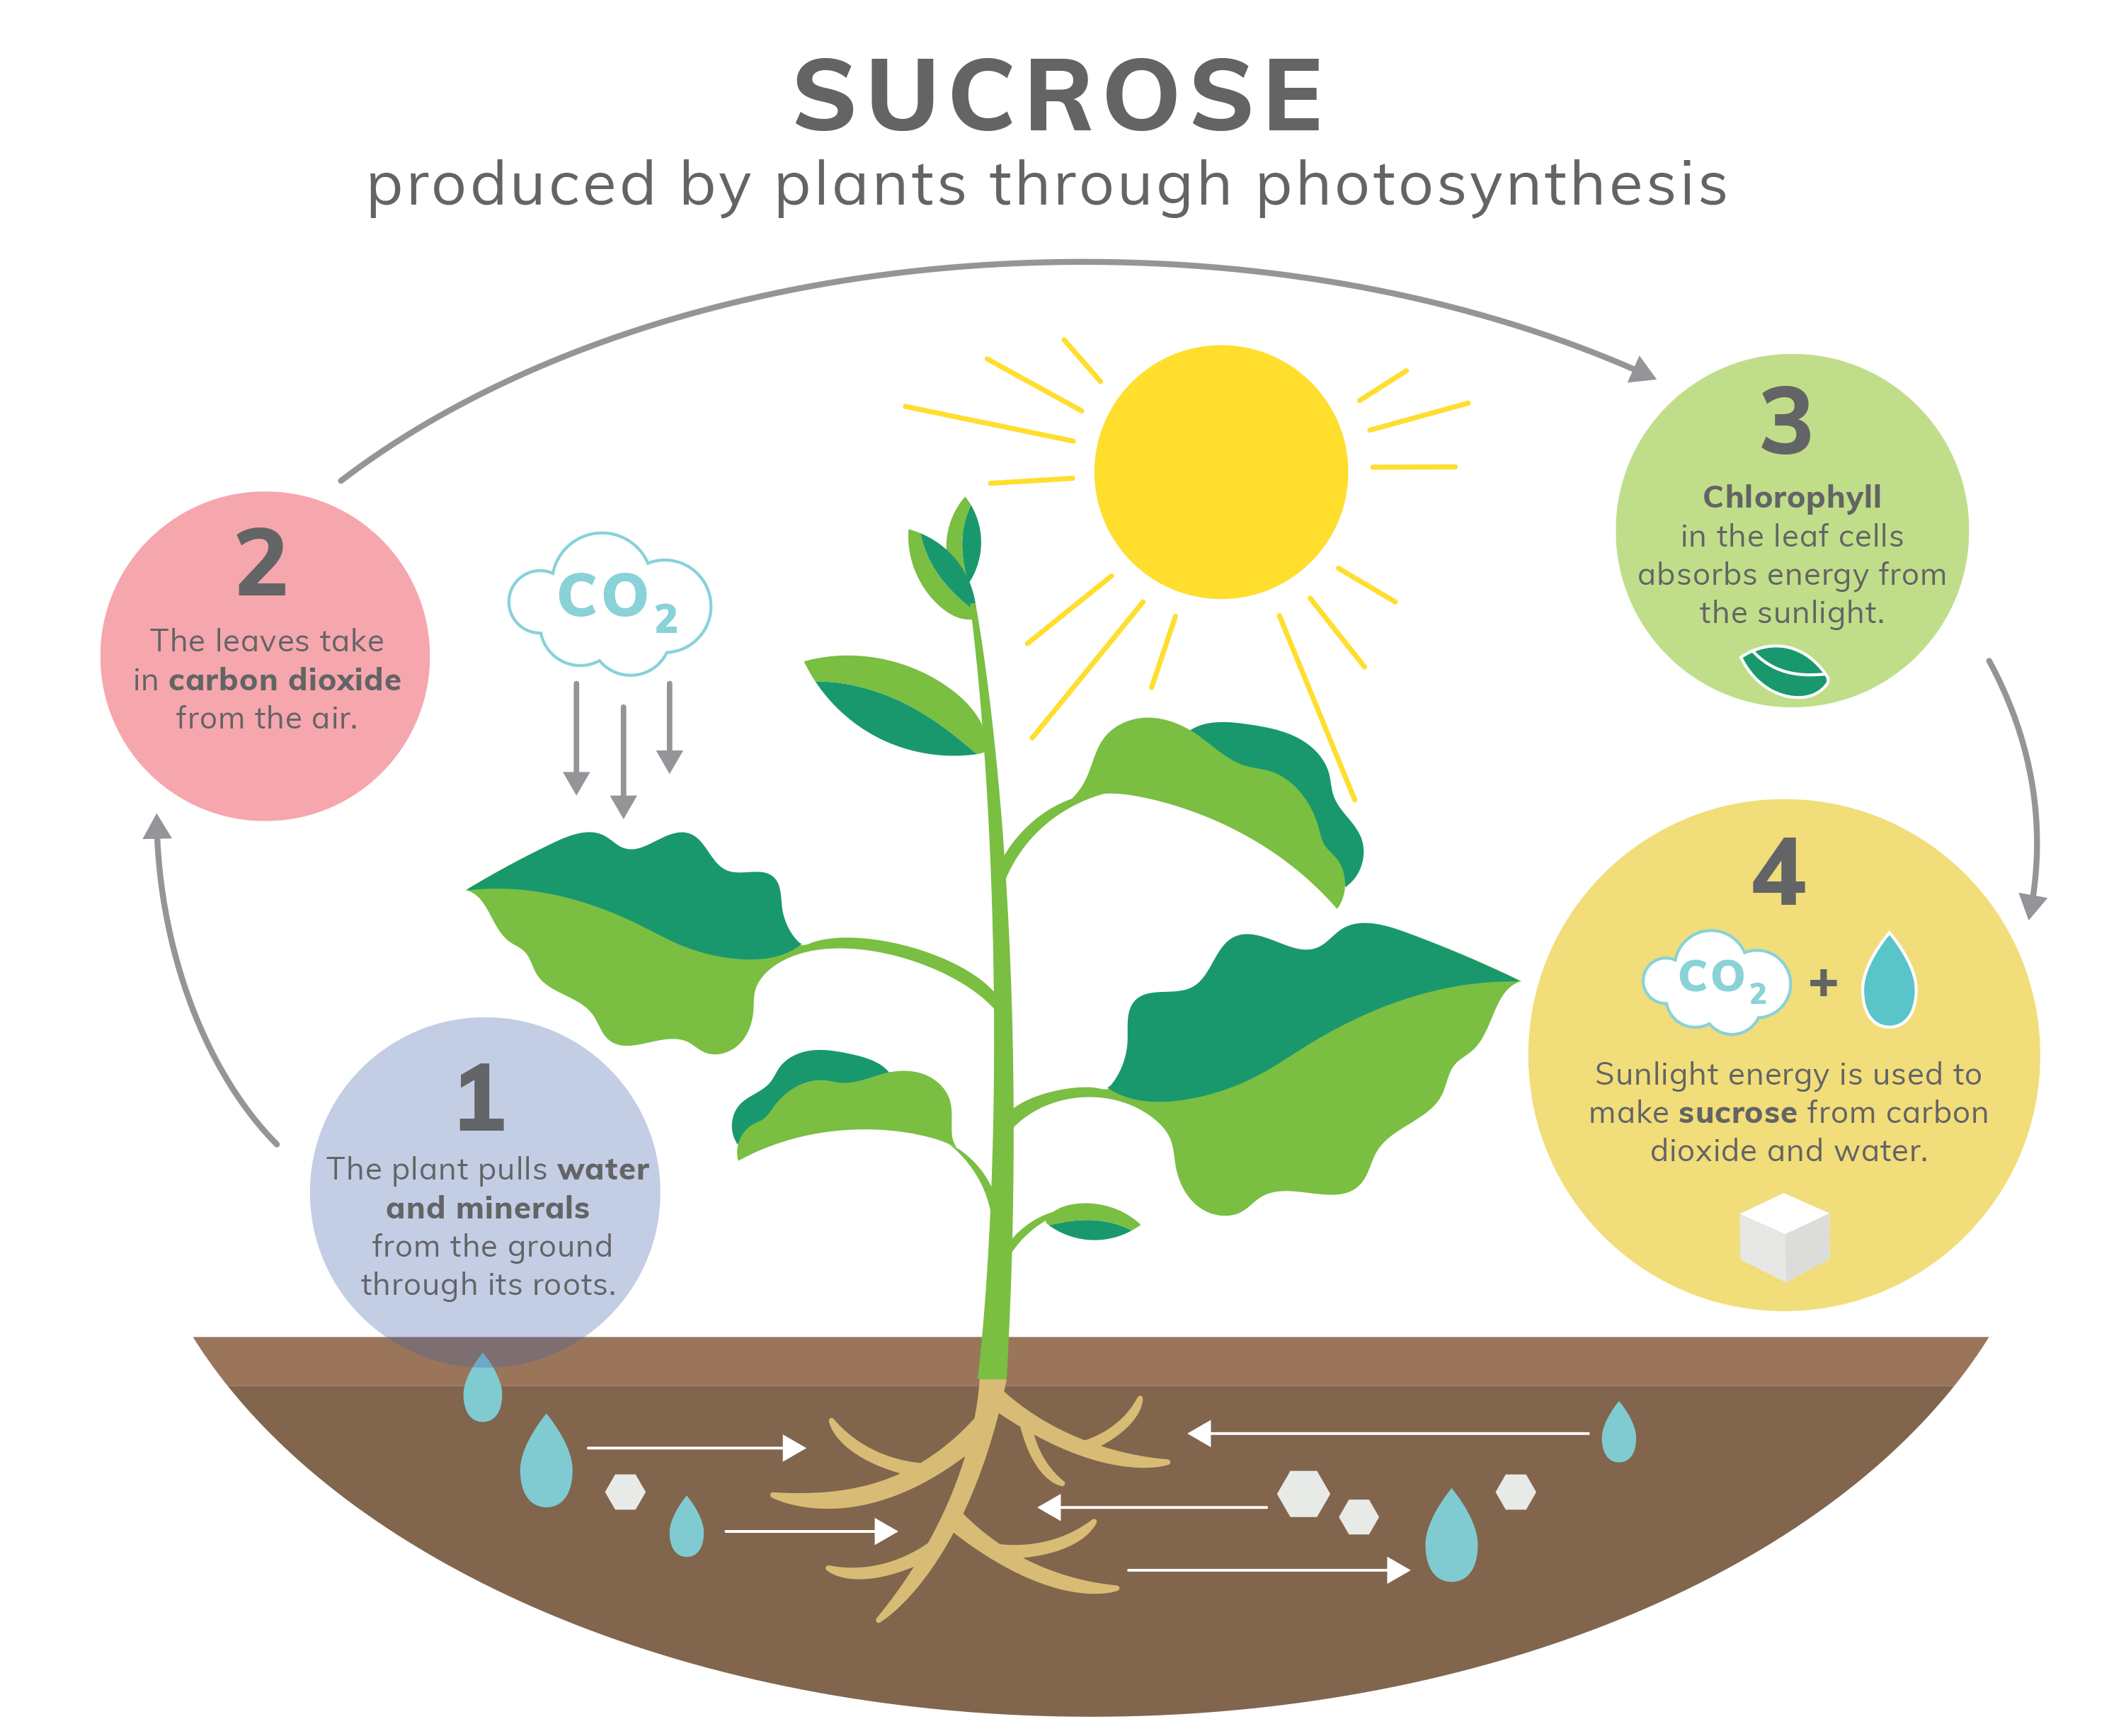 SUCROSE - produced by plants through photosynthesis